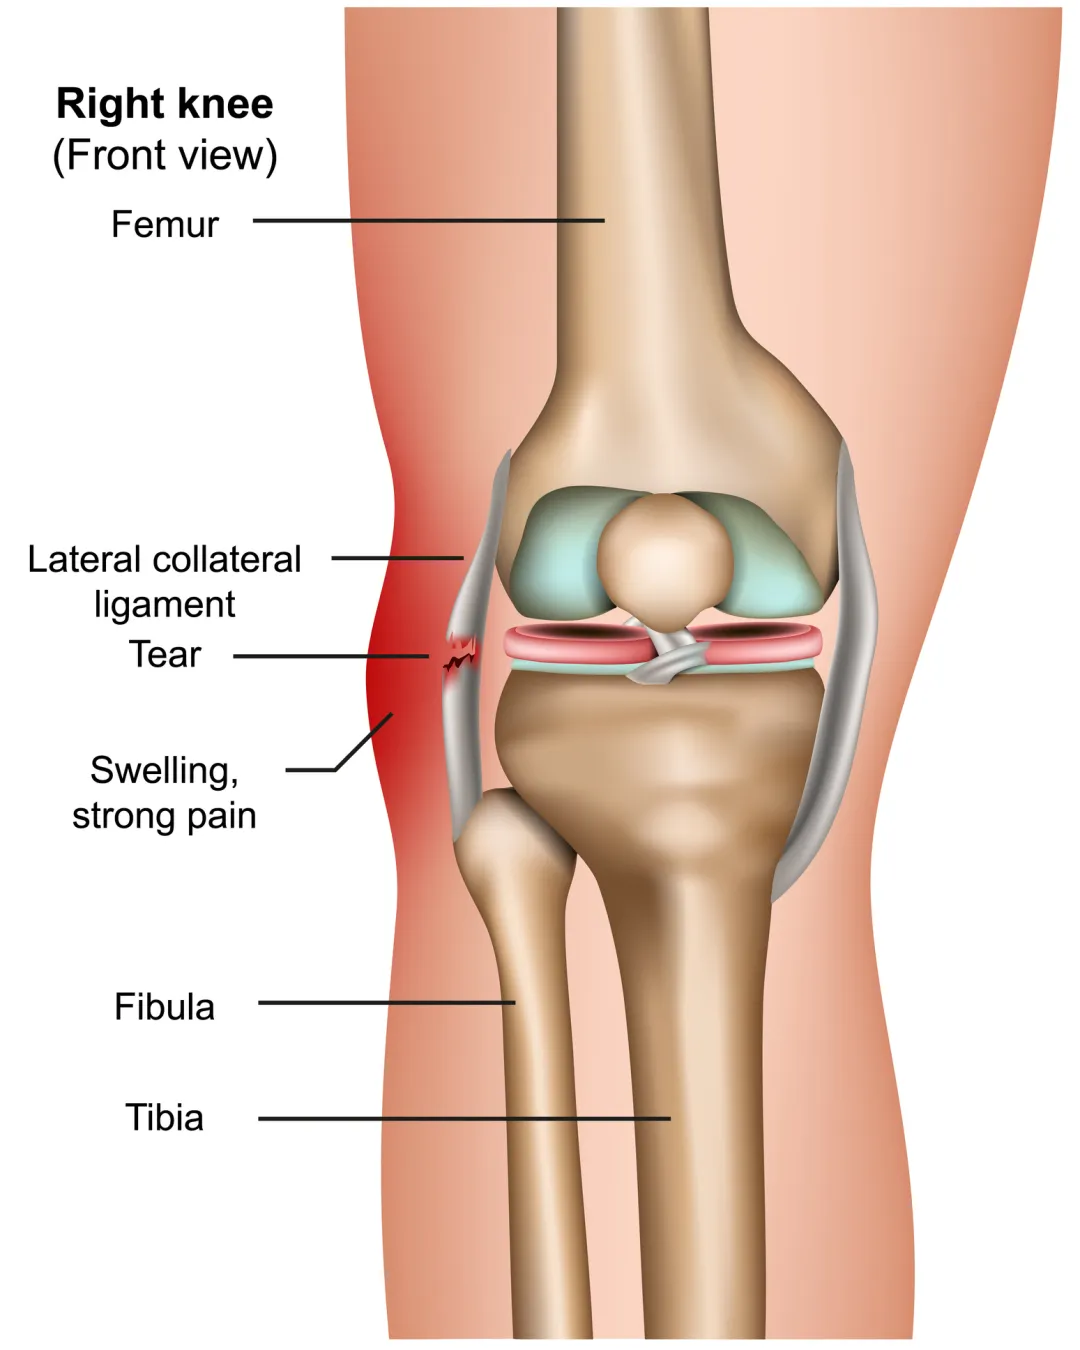 LCL Injury - Motus Physical Therapy